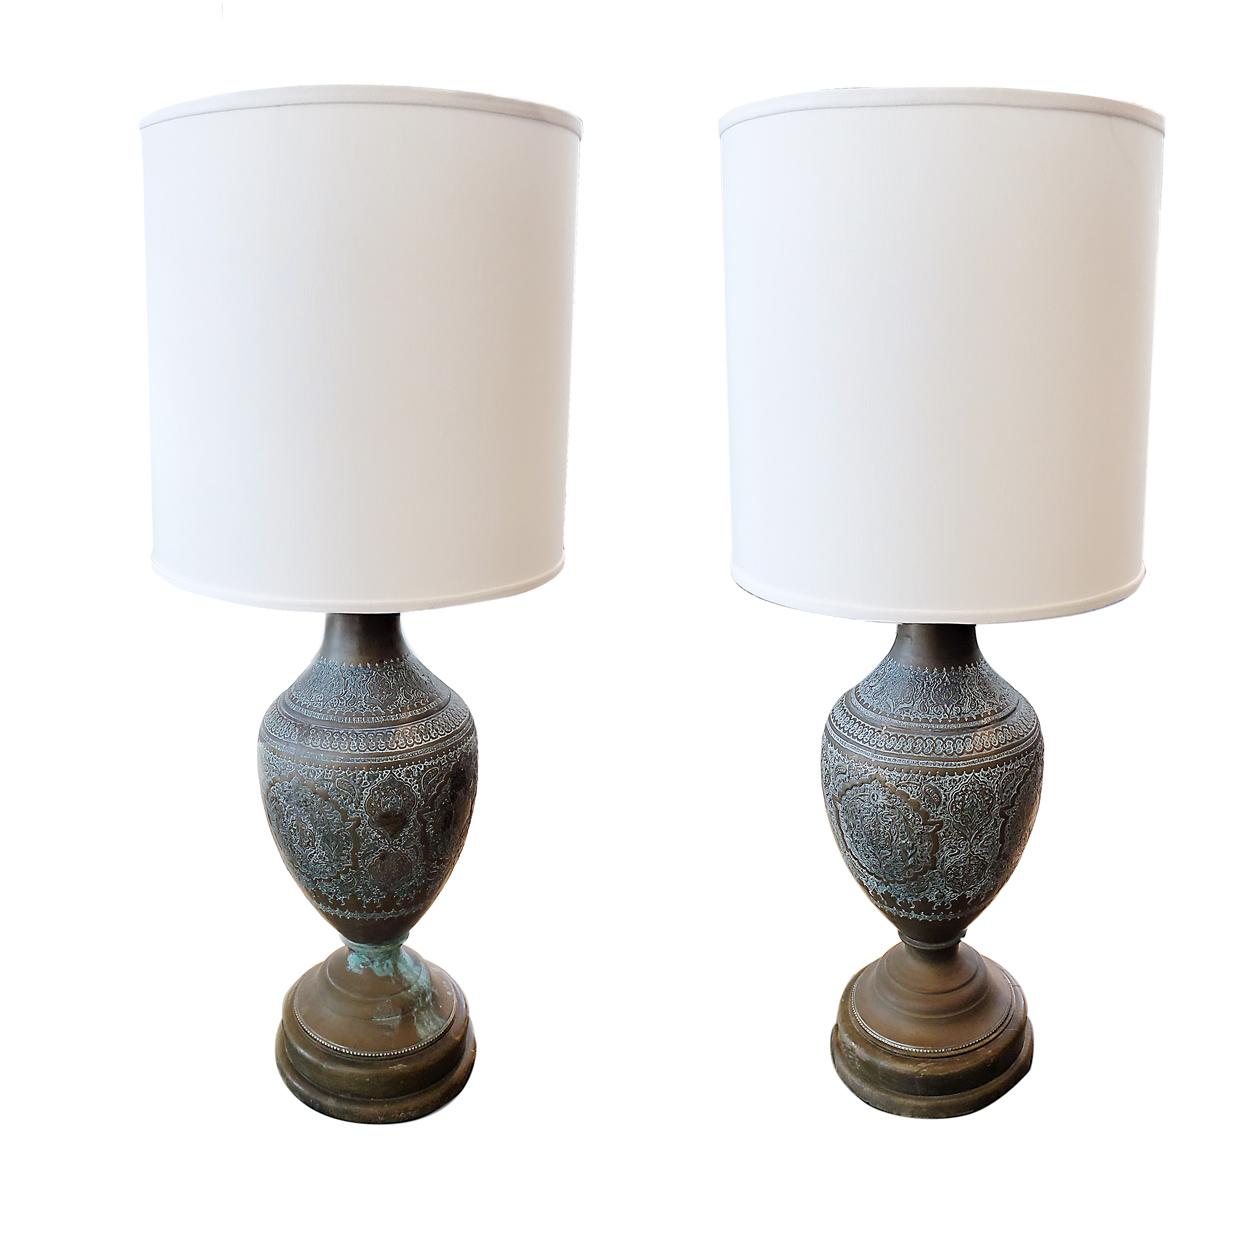 Antique Moroccan Table Lamps